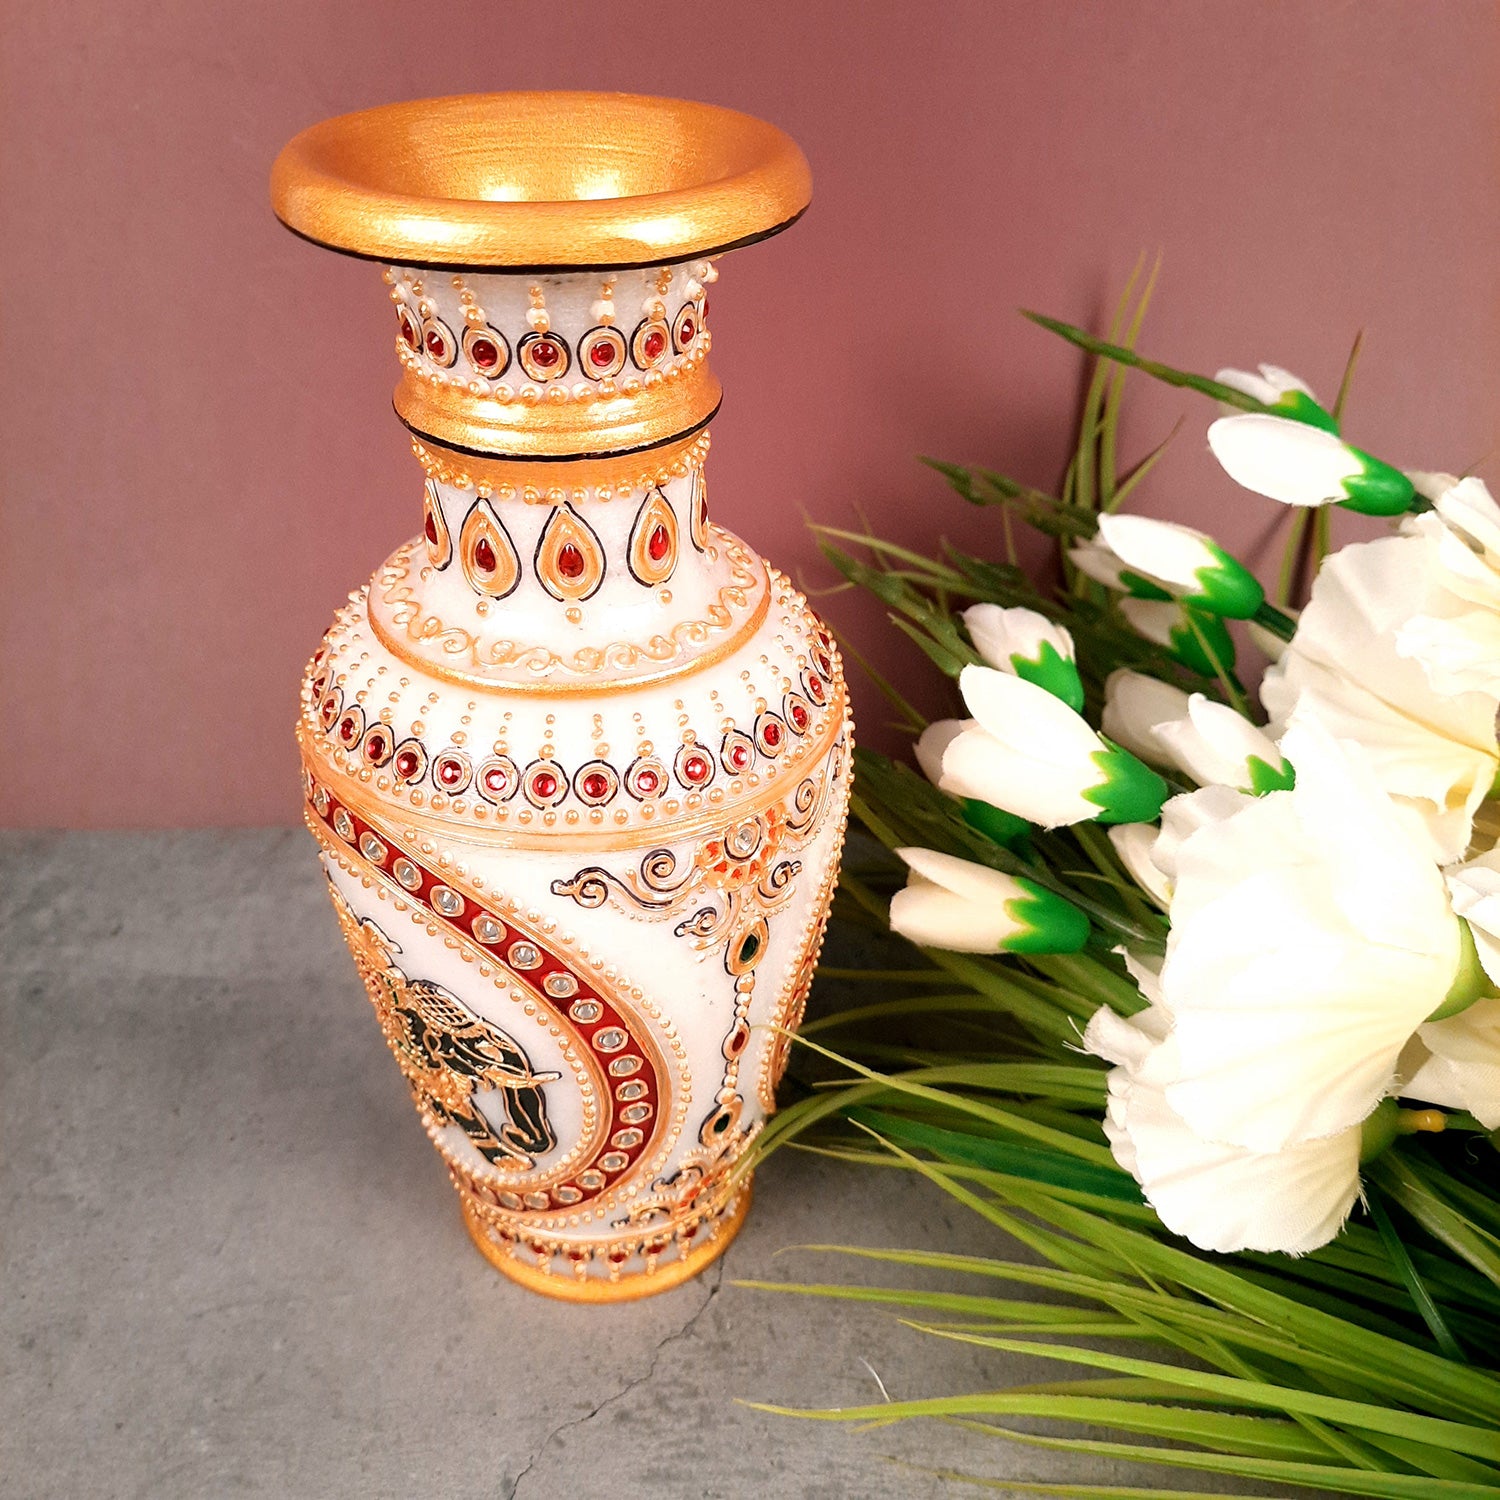 Buy Decorative Flower Vases for Your Home